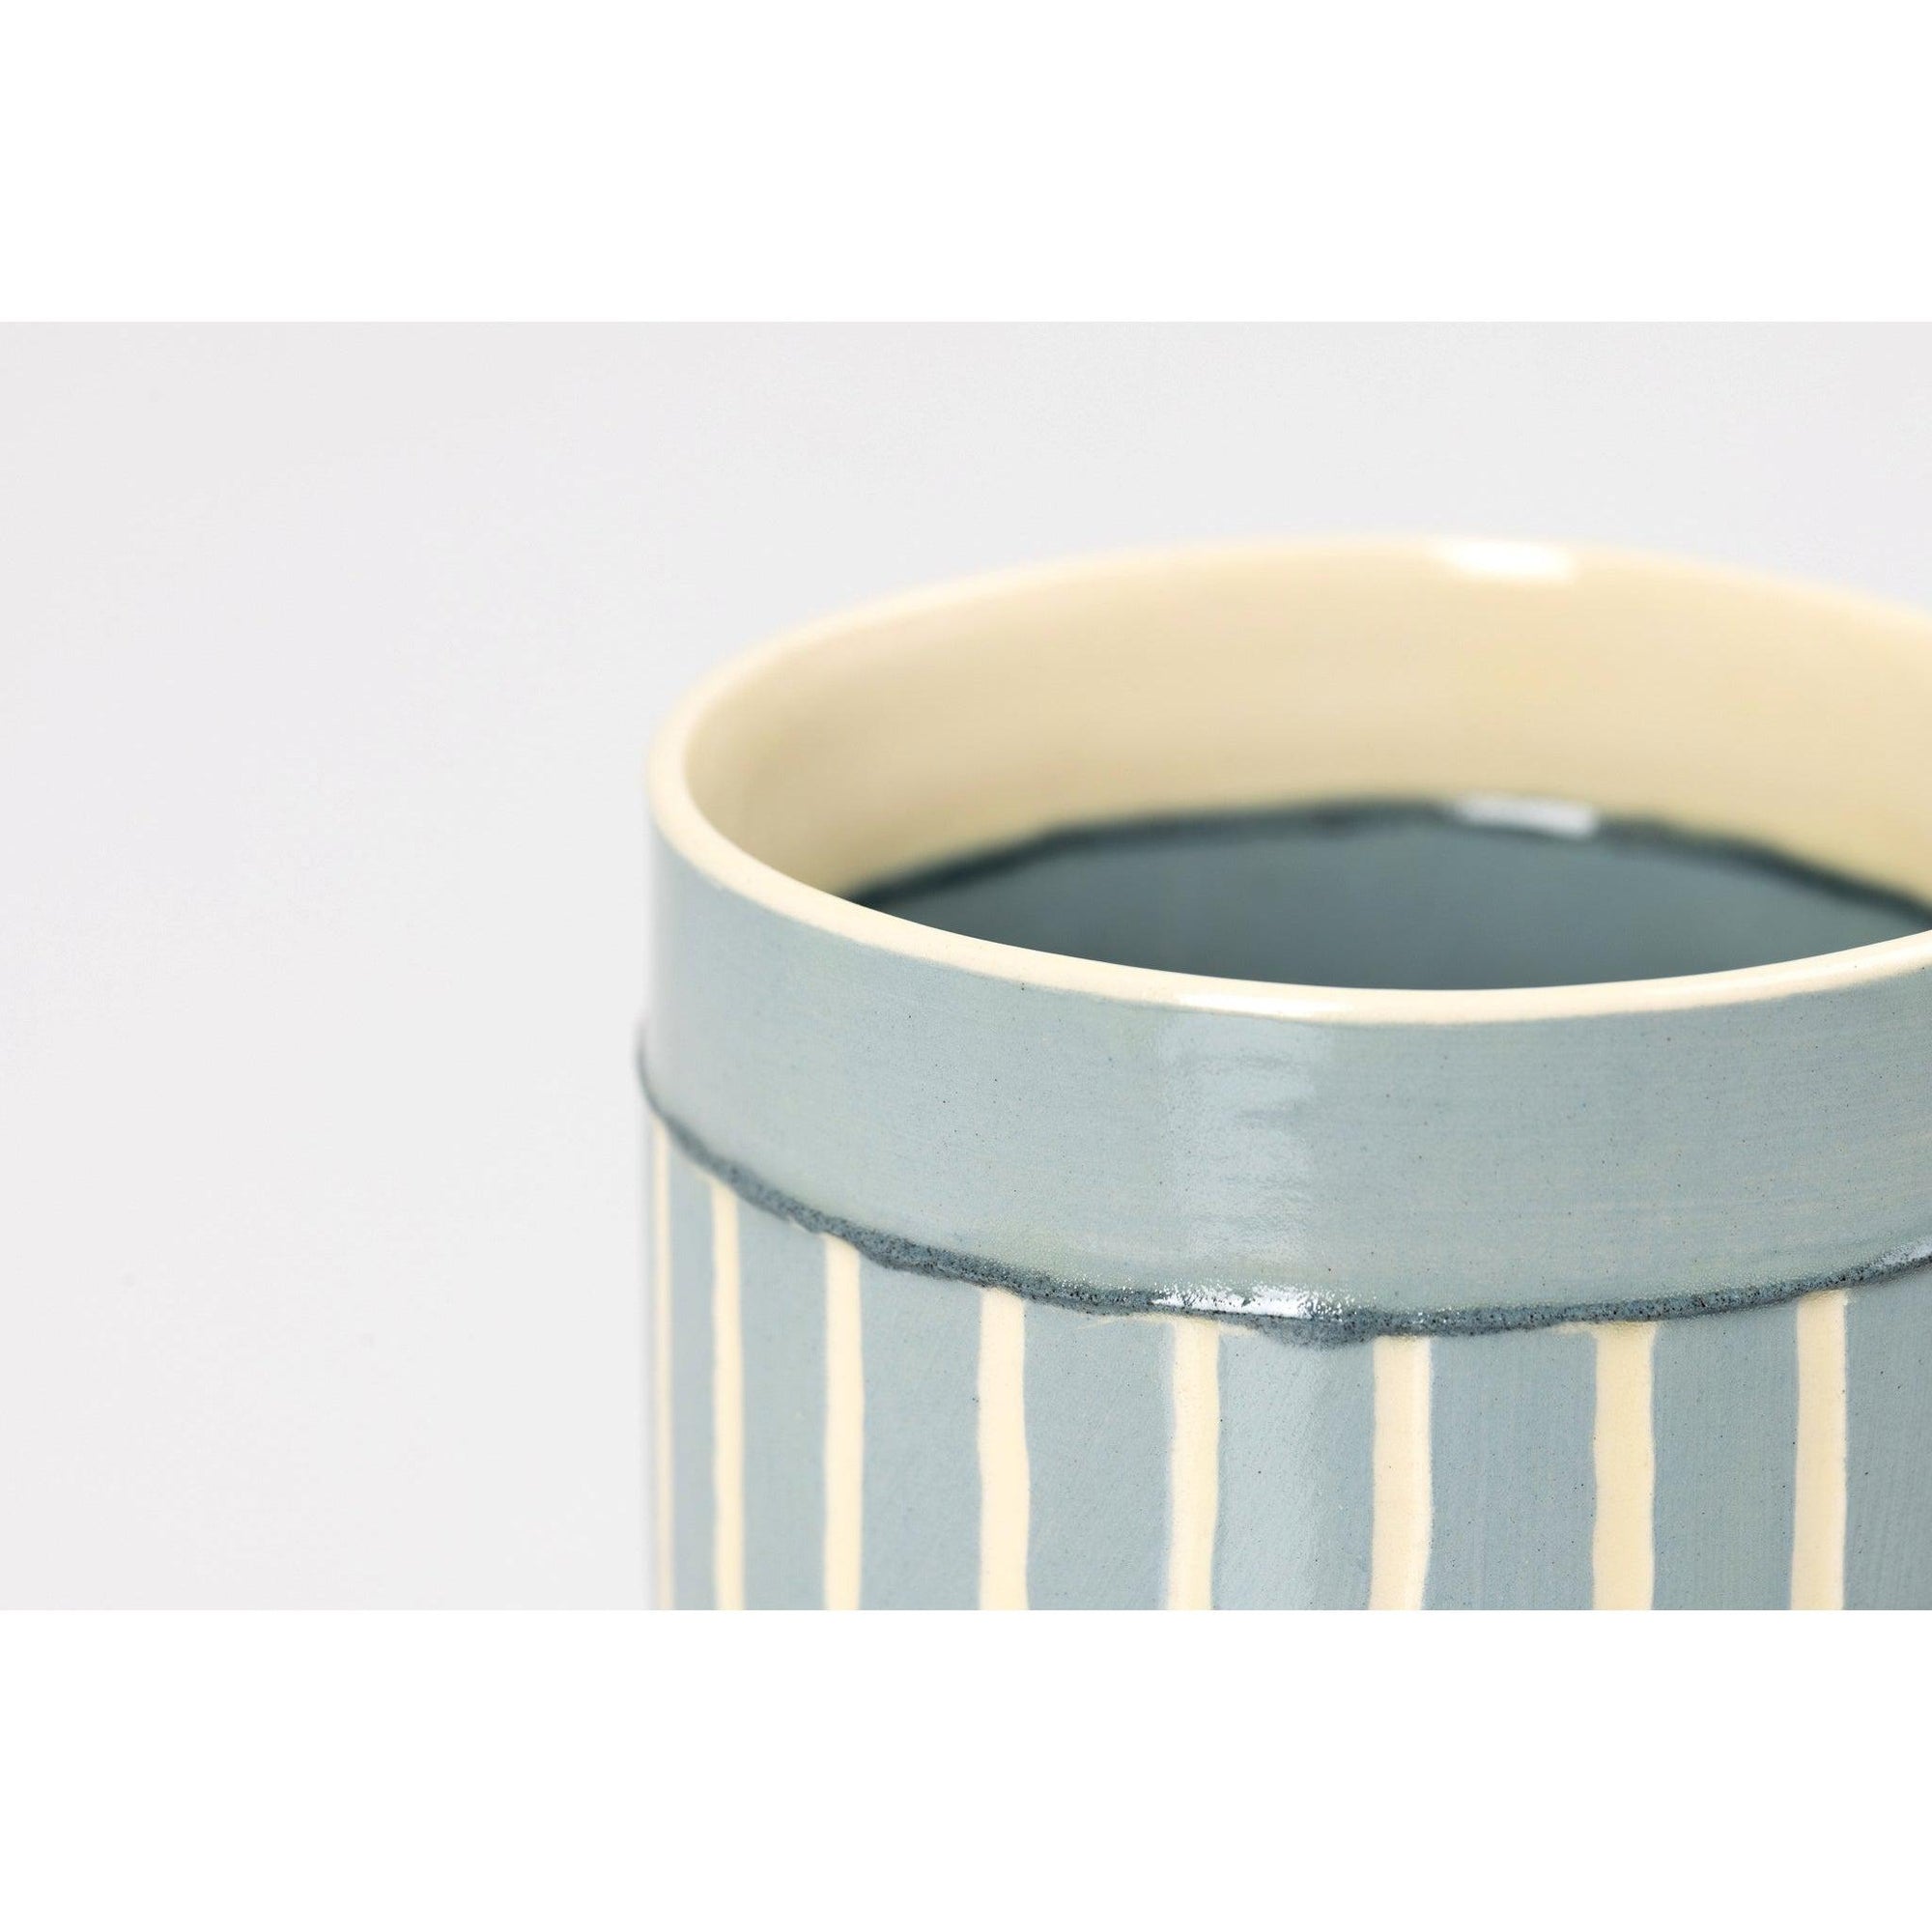 SV6 Small Vessel, handbuilt ceramic created by Emily-Kriste Wilcox, available from Padstow Gallery, Cornwall